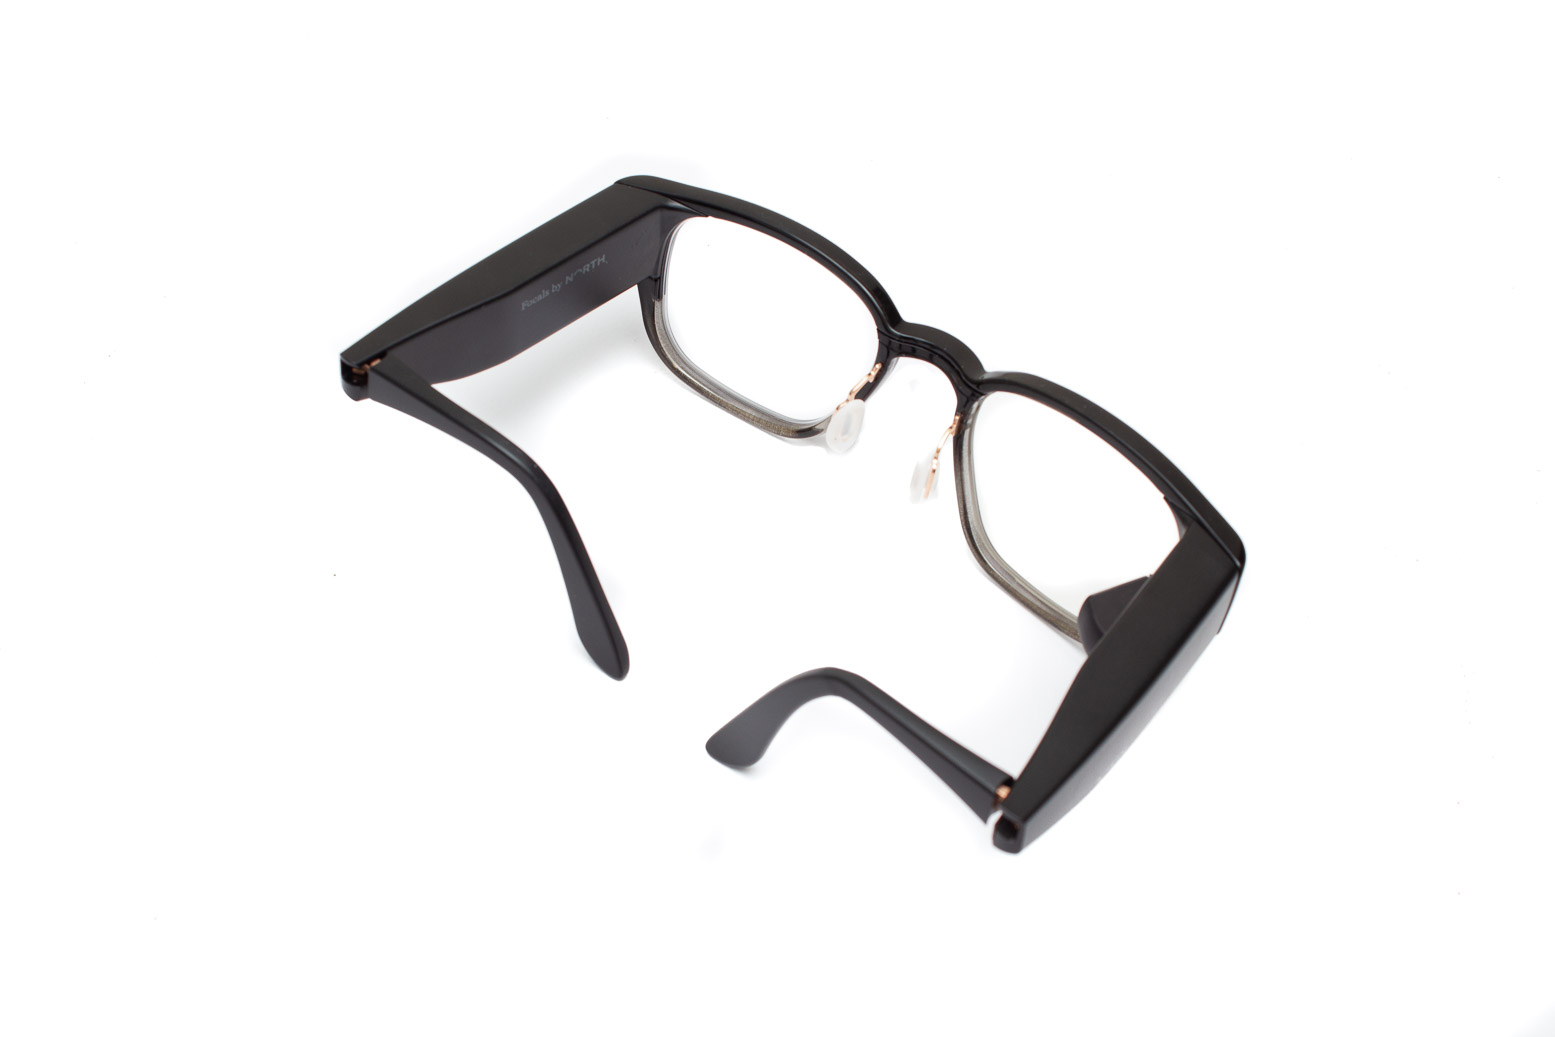 North Focals Review An Impressive And Stylish Try At Smart